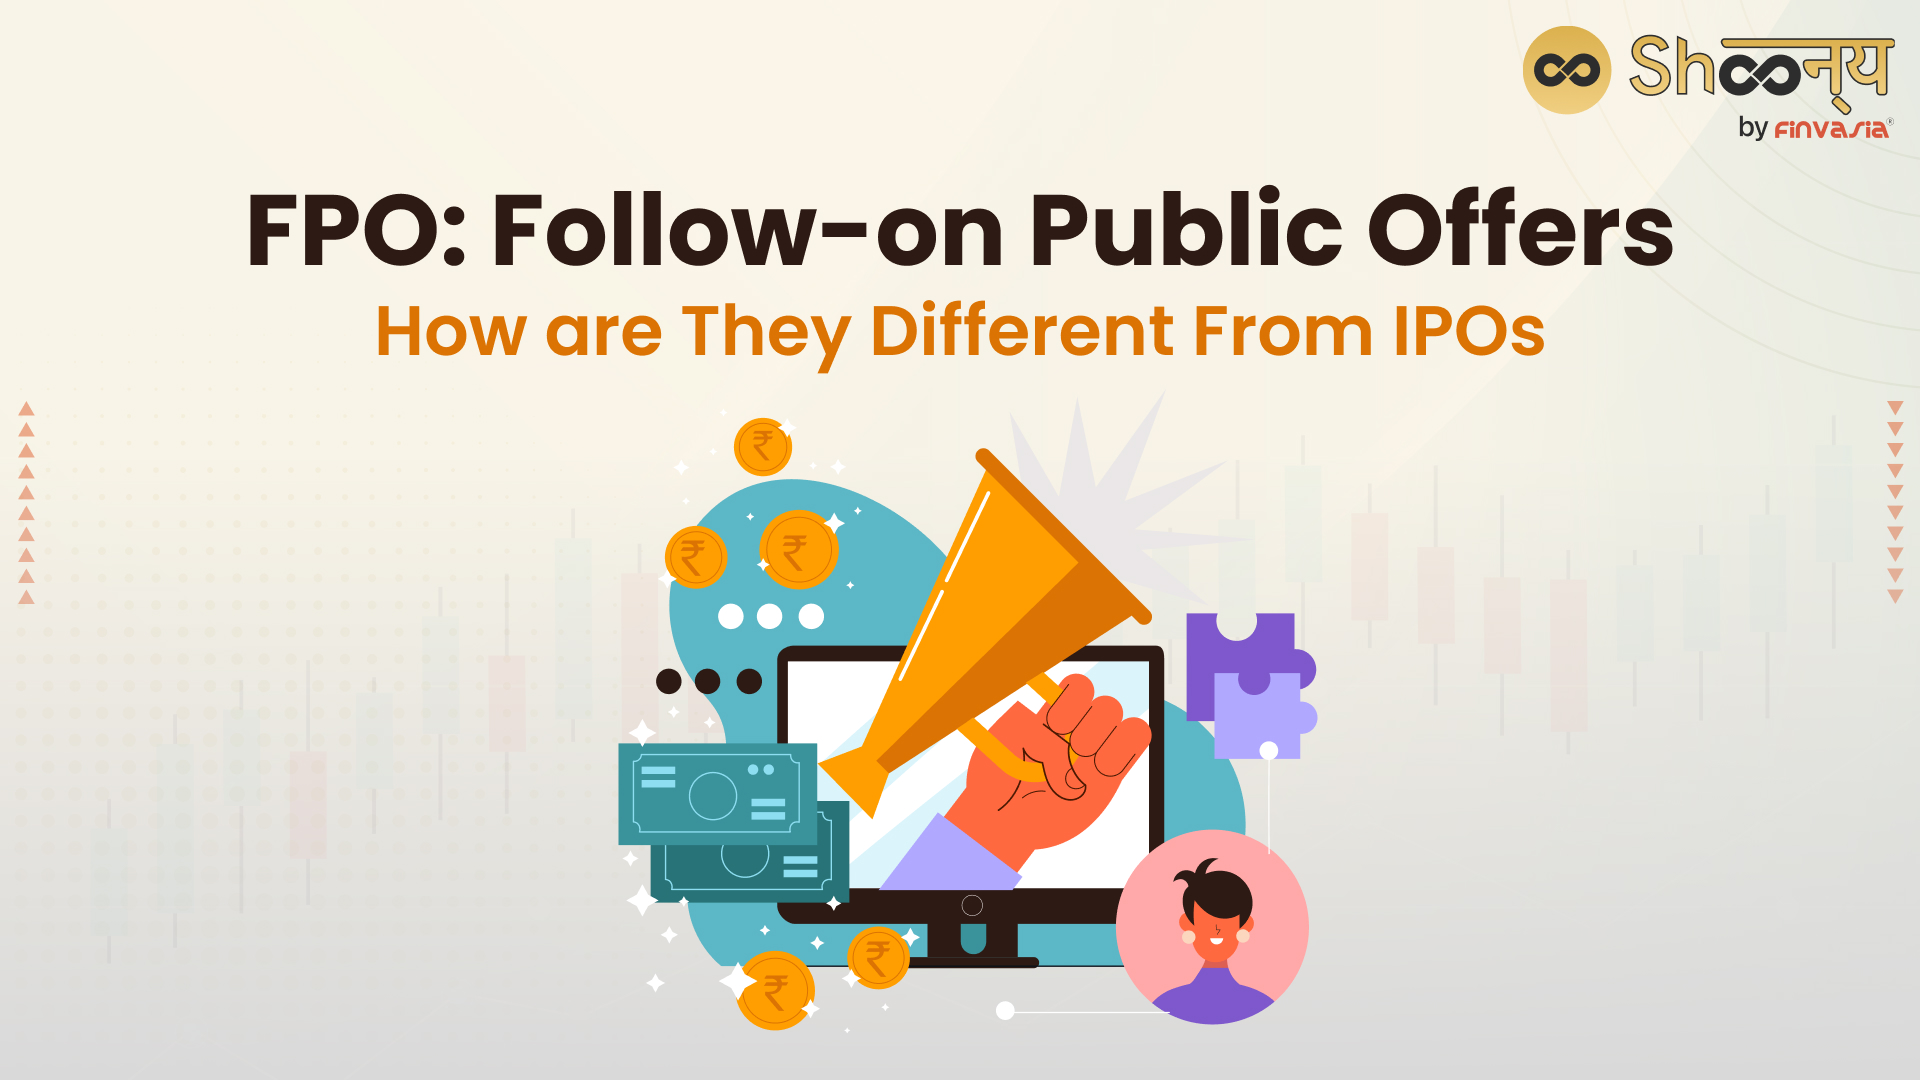 FPO (Follow-on Public Offers): How are They Different From IPOs